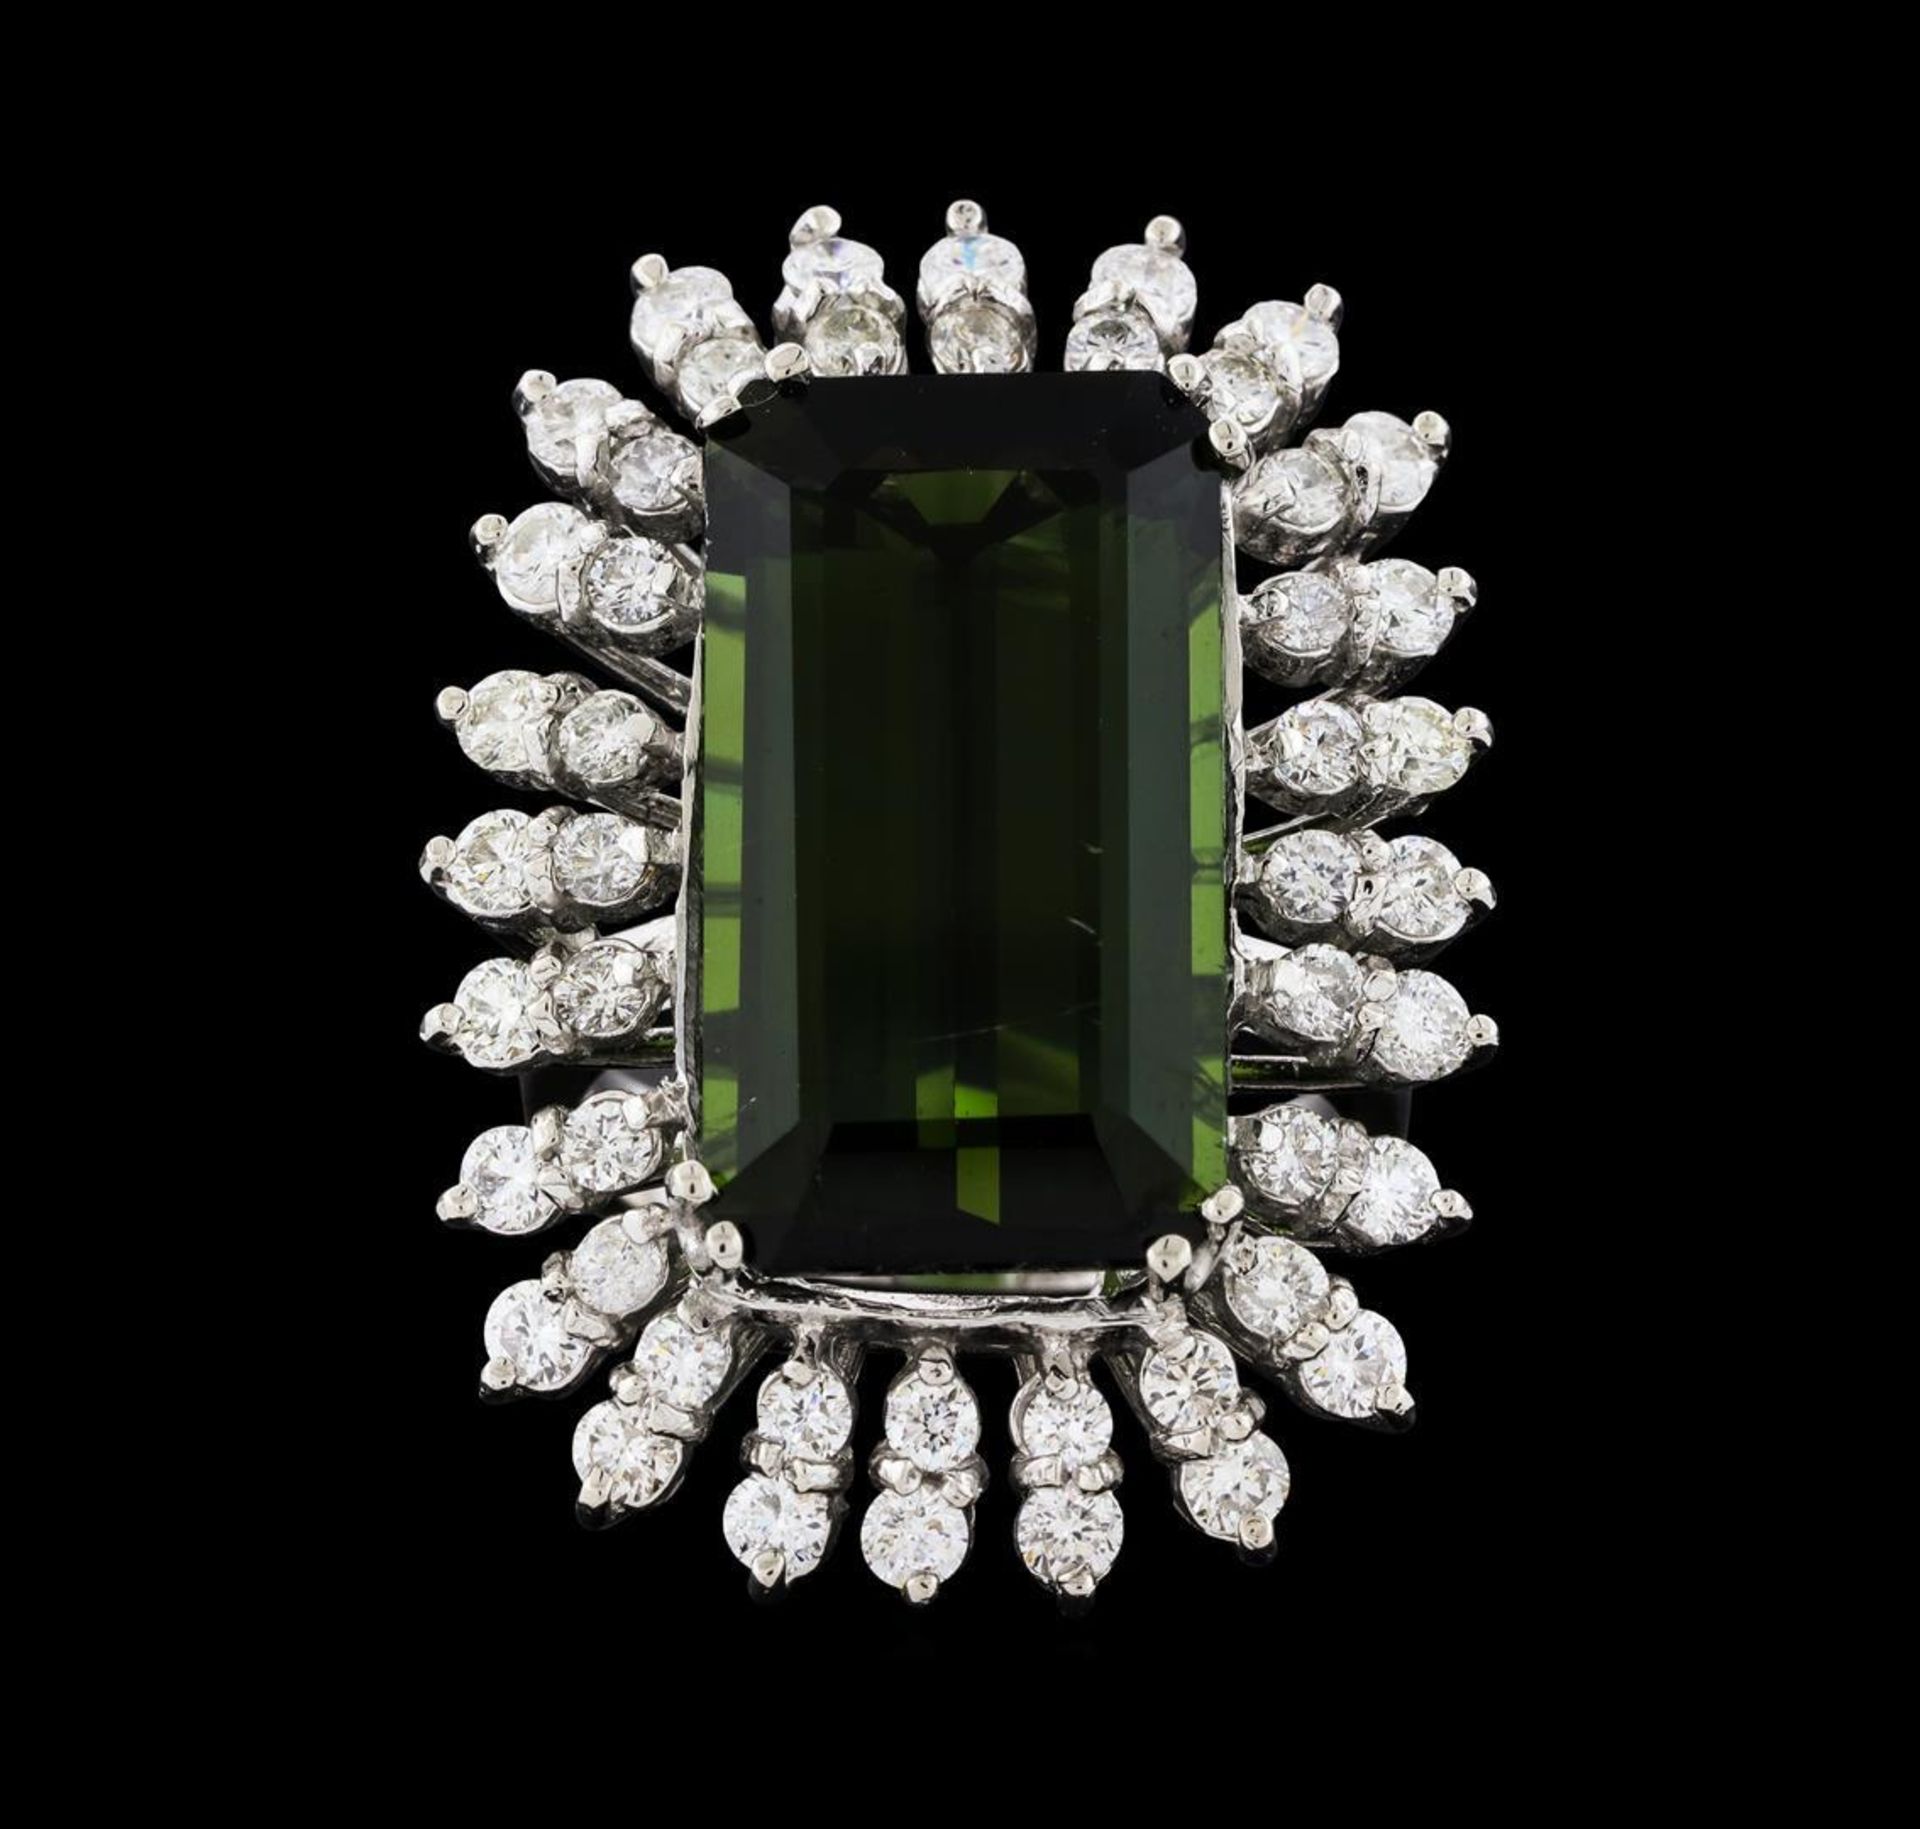 16.67 ctw Tourmaline and Diamond Ring - 14KT White Gold - Image 2 of 5